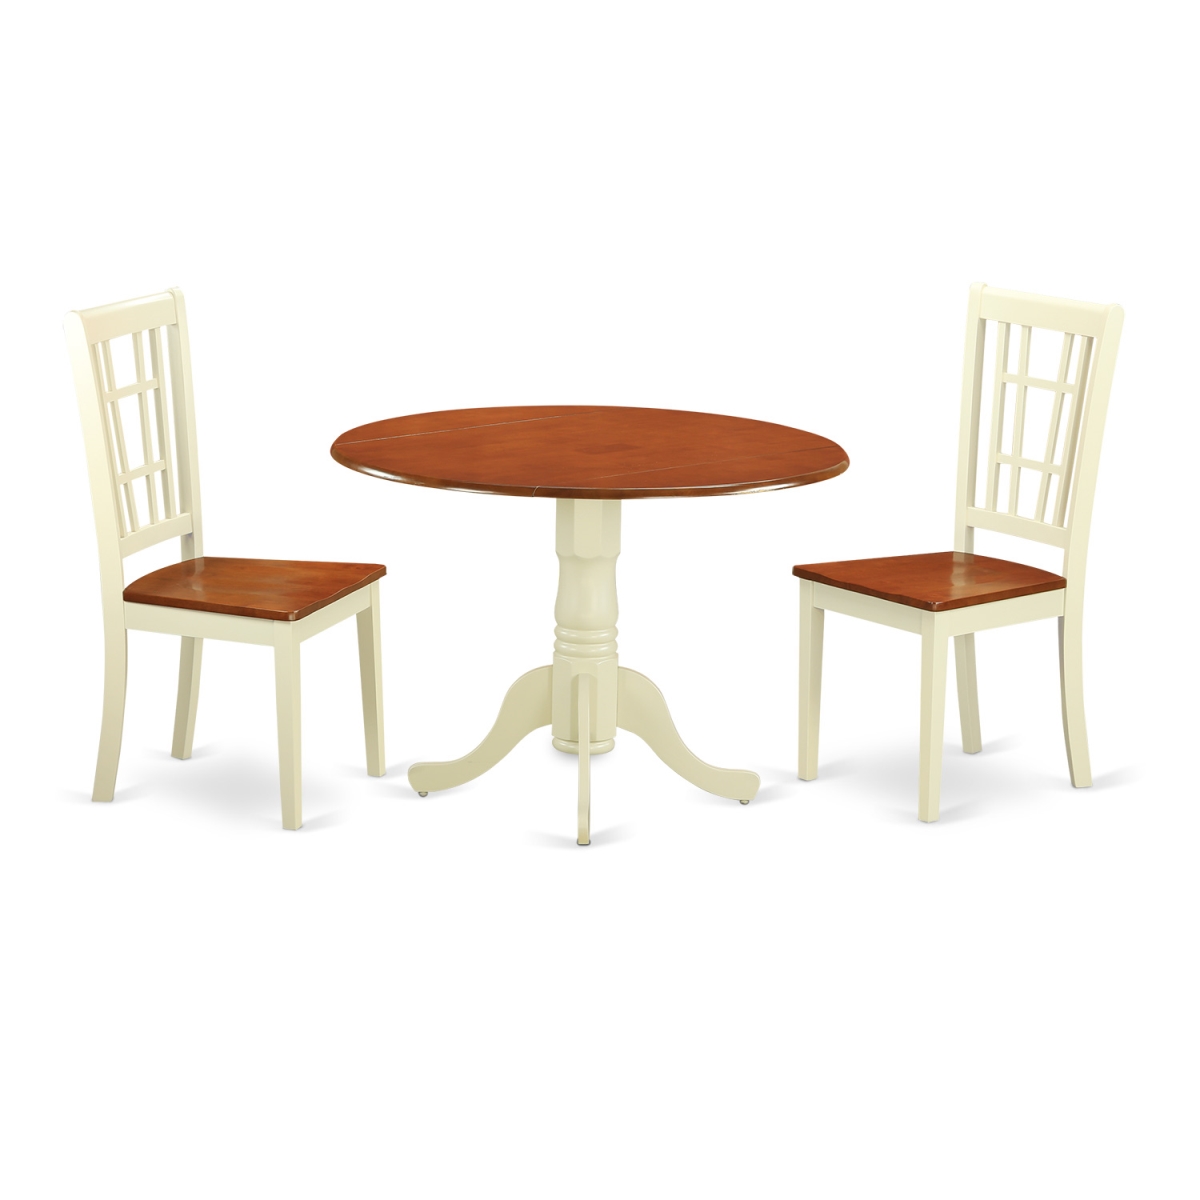 Dlni3-bmk-w Dinette Set With 2 Table & 2 Chairs, Buttermilk & Cherry - 3 Piece